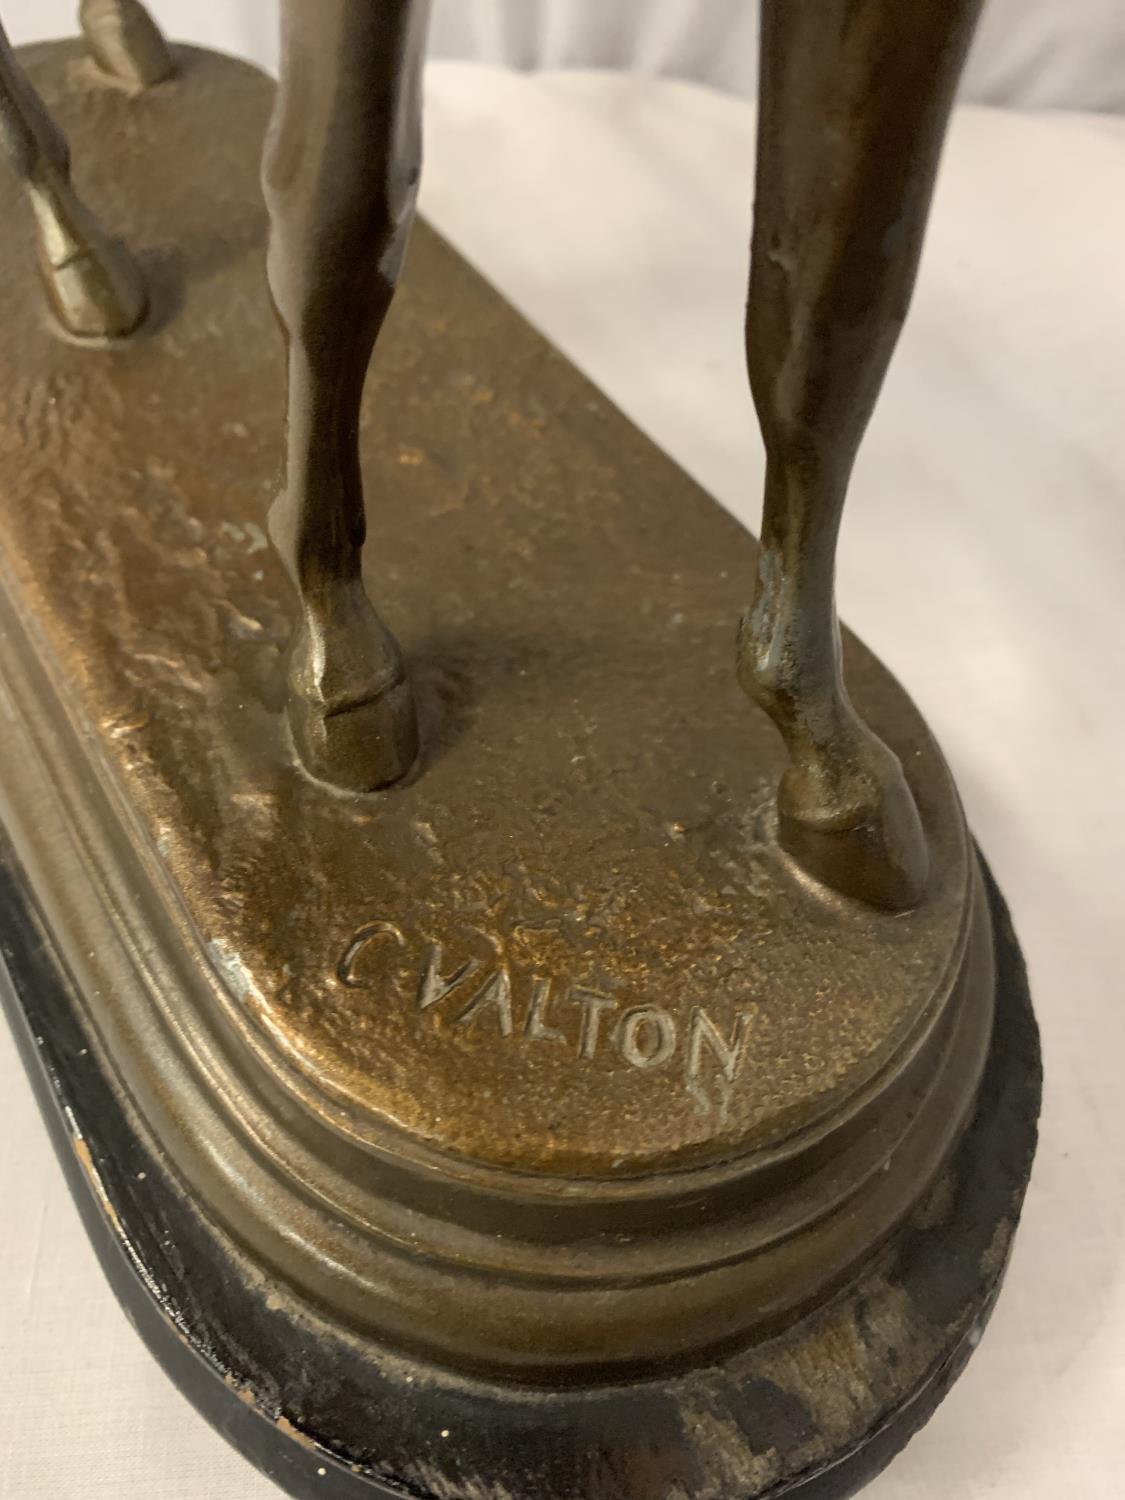 A SPELTER FIGURINE IN THE FORM OF A HORSE AND JOCKEY SIGNED C VALTON - Image 4 of 4